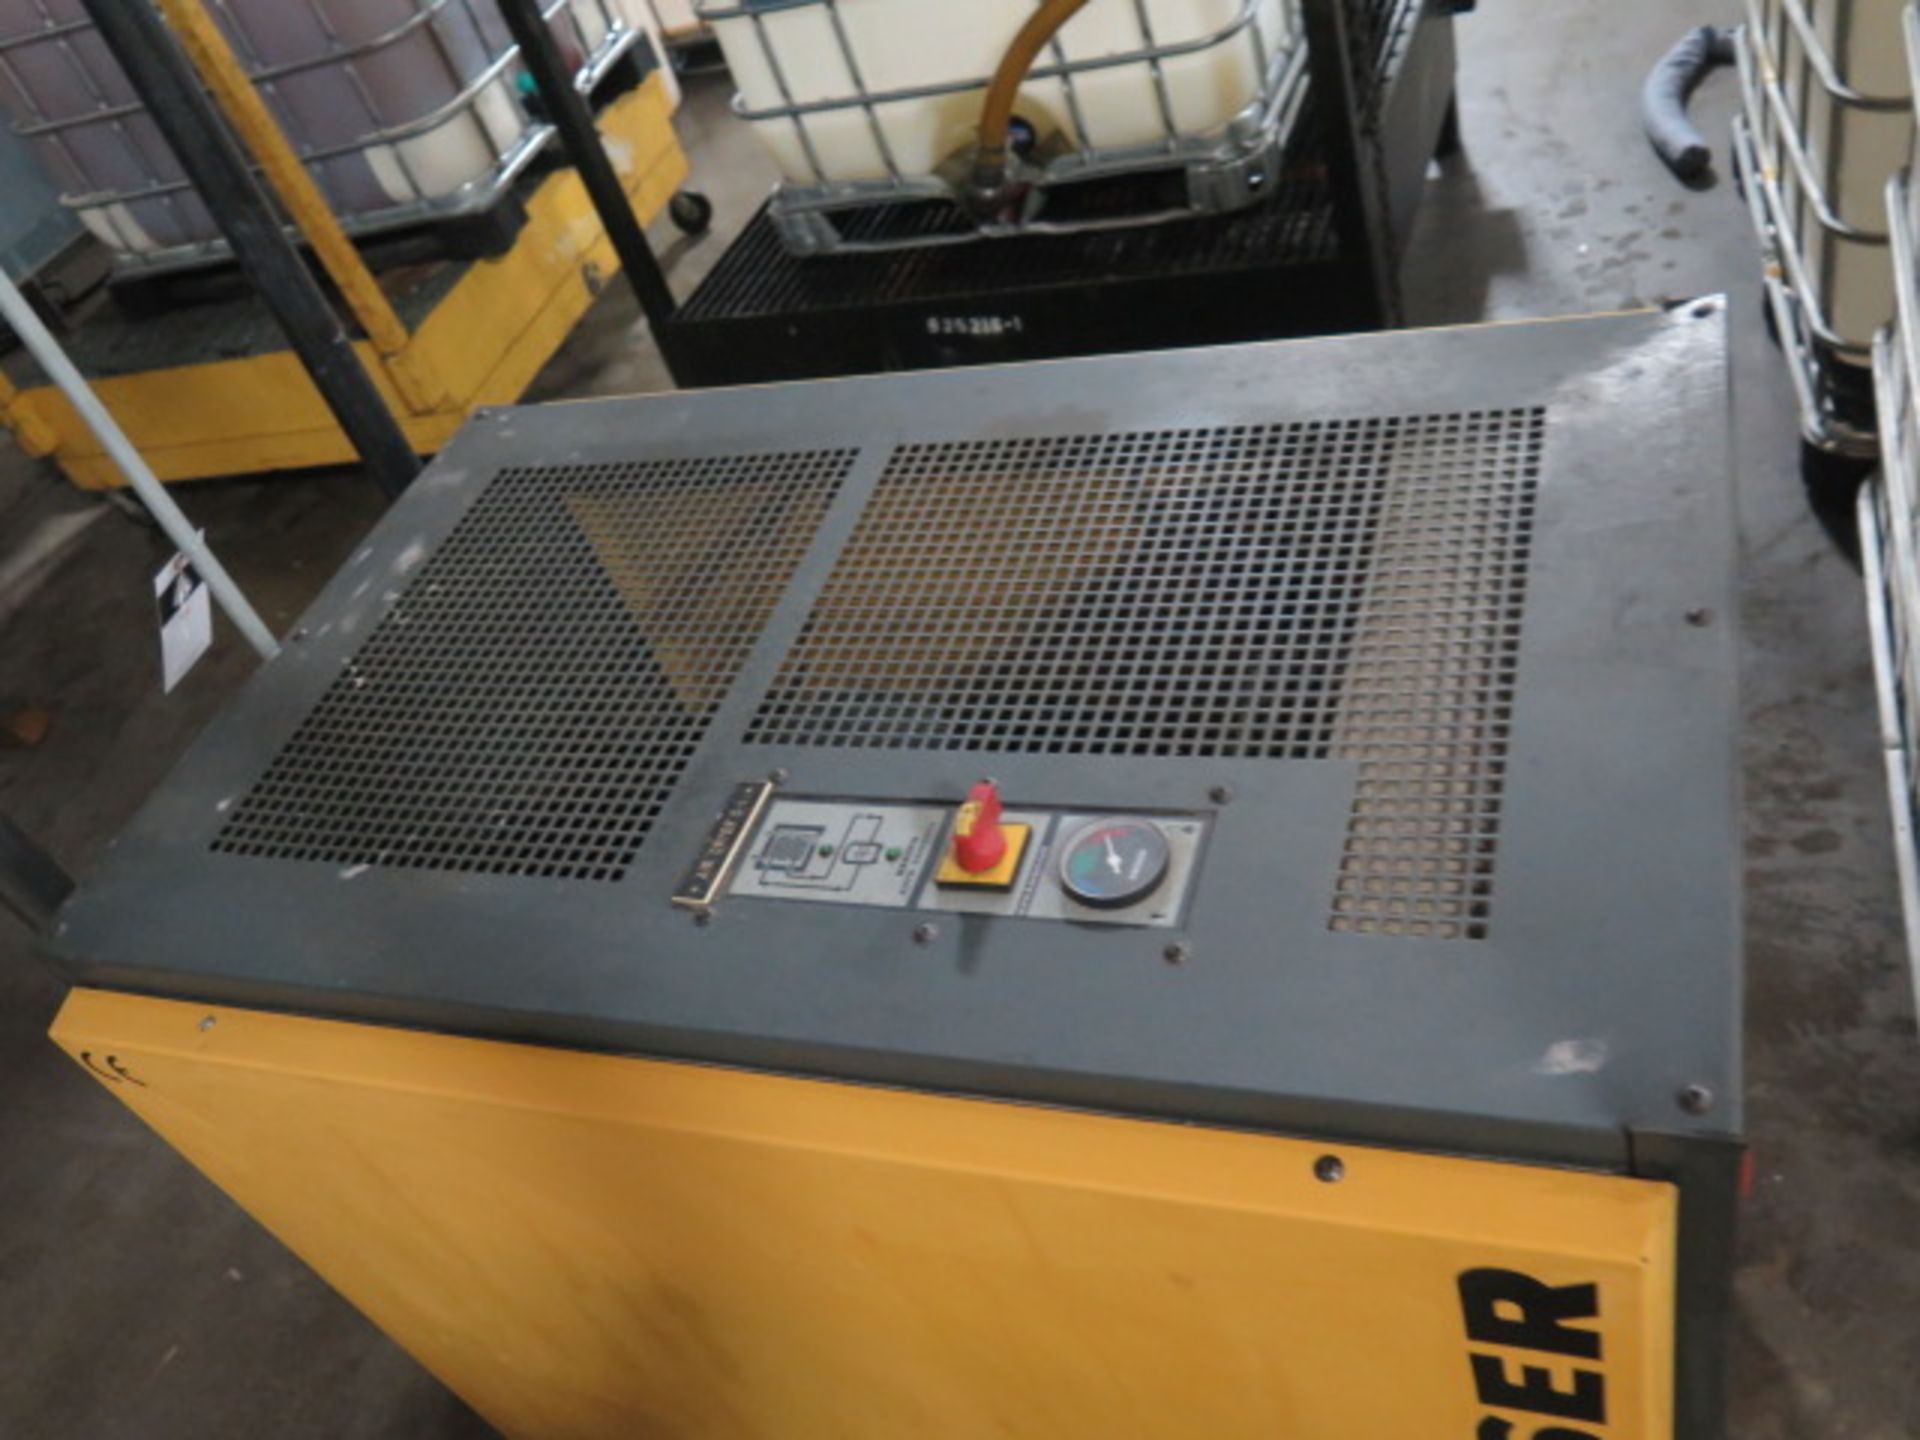 2005 Kaeser TD61 Refrigerated Air Dryer s/n 1187 (SOLD AS-IS - NO WARRANTY) - Image 3 of 6